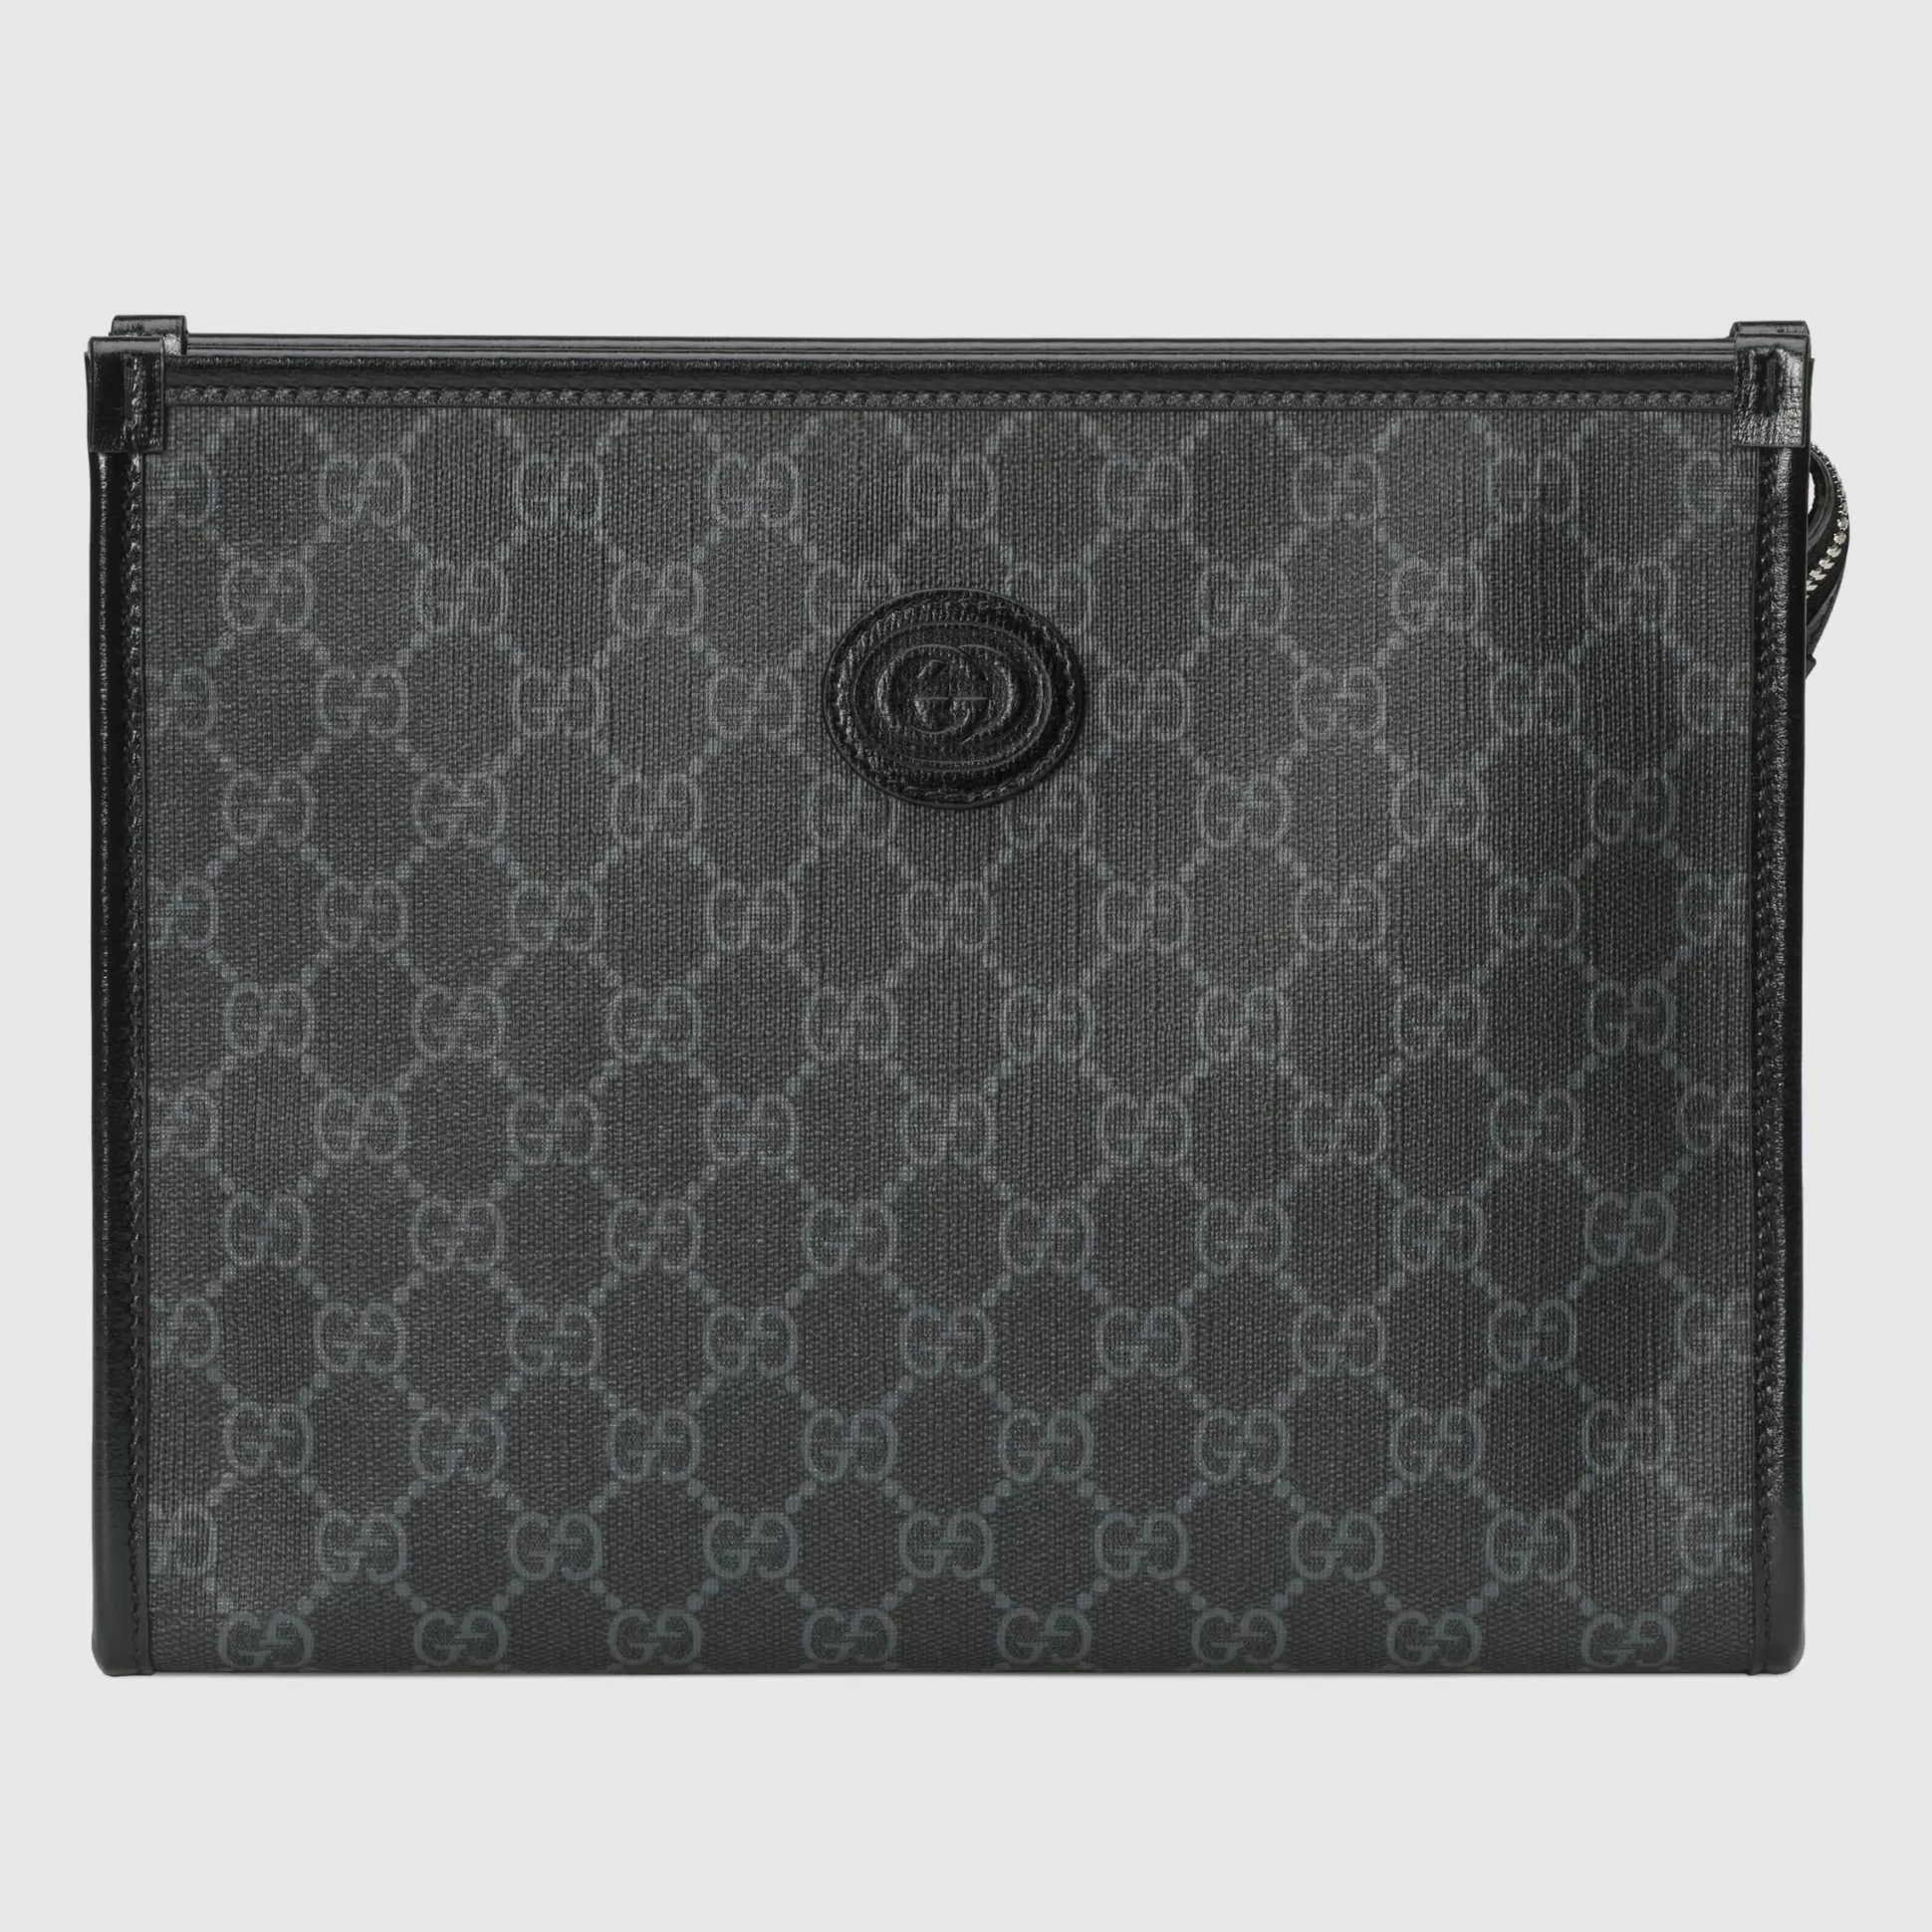 GUCCI Beauty Case With Interlocking G-Men Small Bags & Pouches